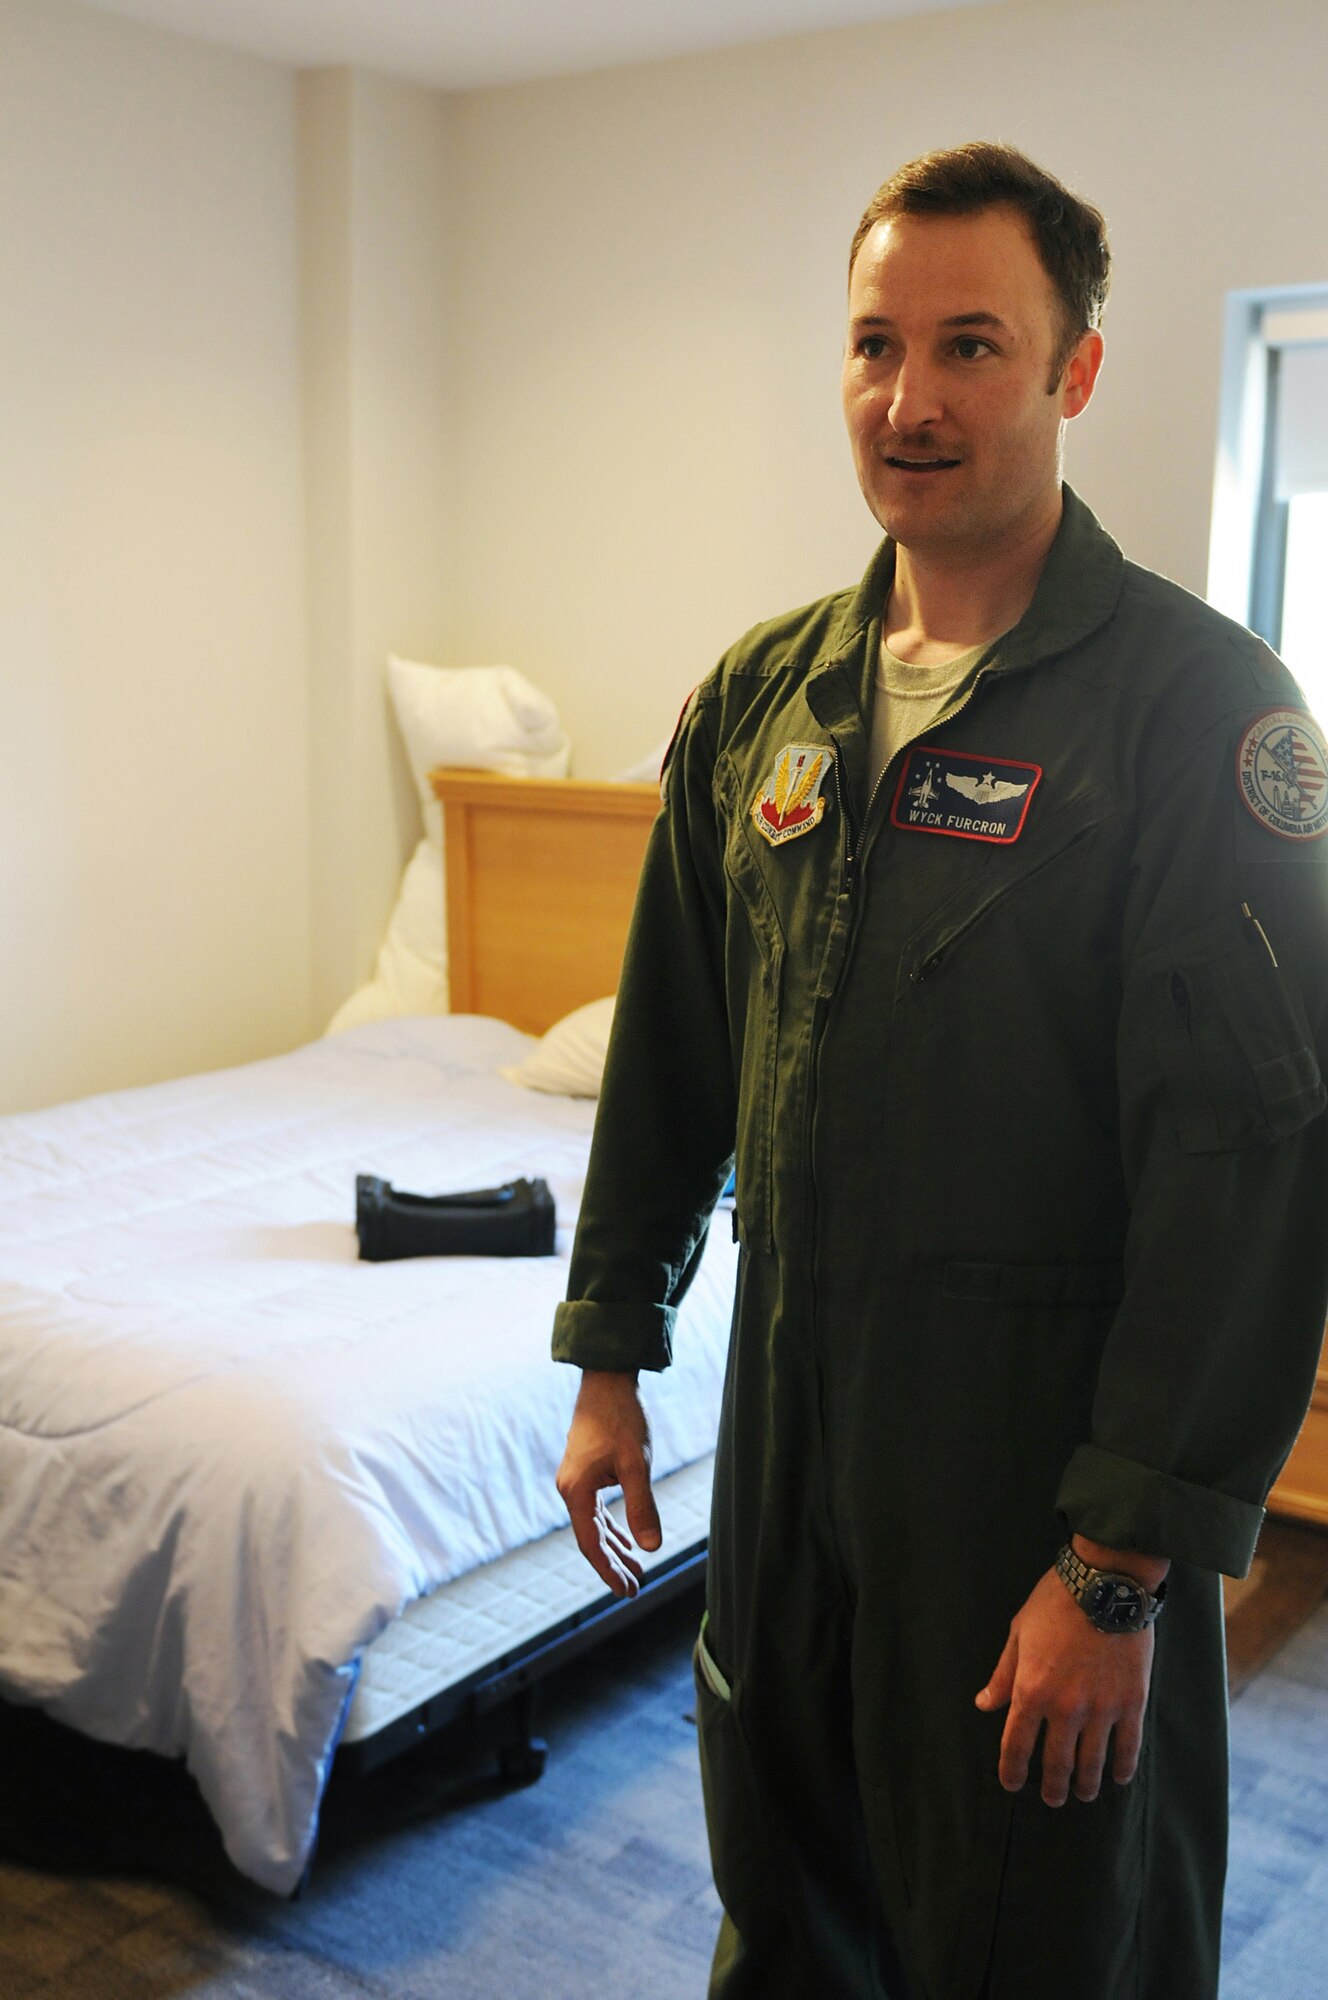 At the start of his 24 hour shift, pilot Maj. Wyck Furcron, with the 121st Fighter Squadron, drops his overnight bag in one of the many bedrooms located in the facility at the 113th Fighter Wing's Aerospace Control Alert Detachment, March 14, 2015. The D.C. Air National Guard’s F-16s and ready trained personnel are part of a multi-layered air defense system for the nation’s capital. (Air National Guard photo by Master Sgt. Becky Vanshur)